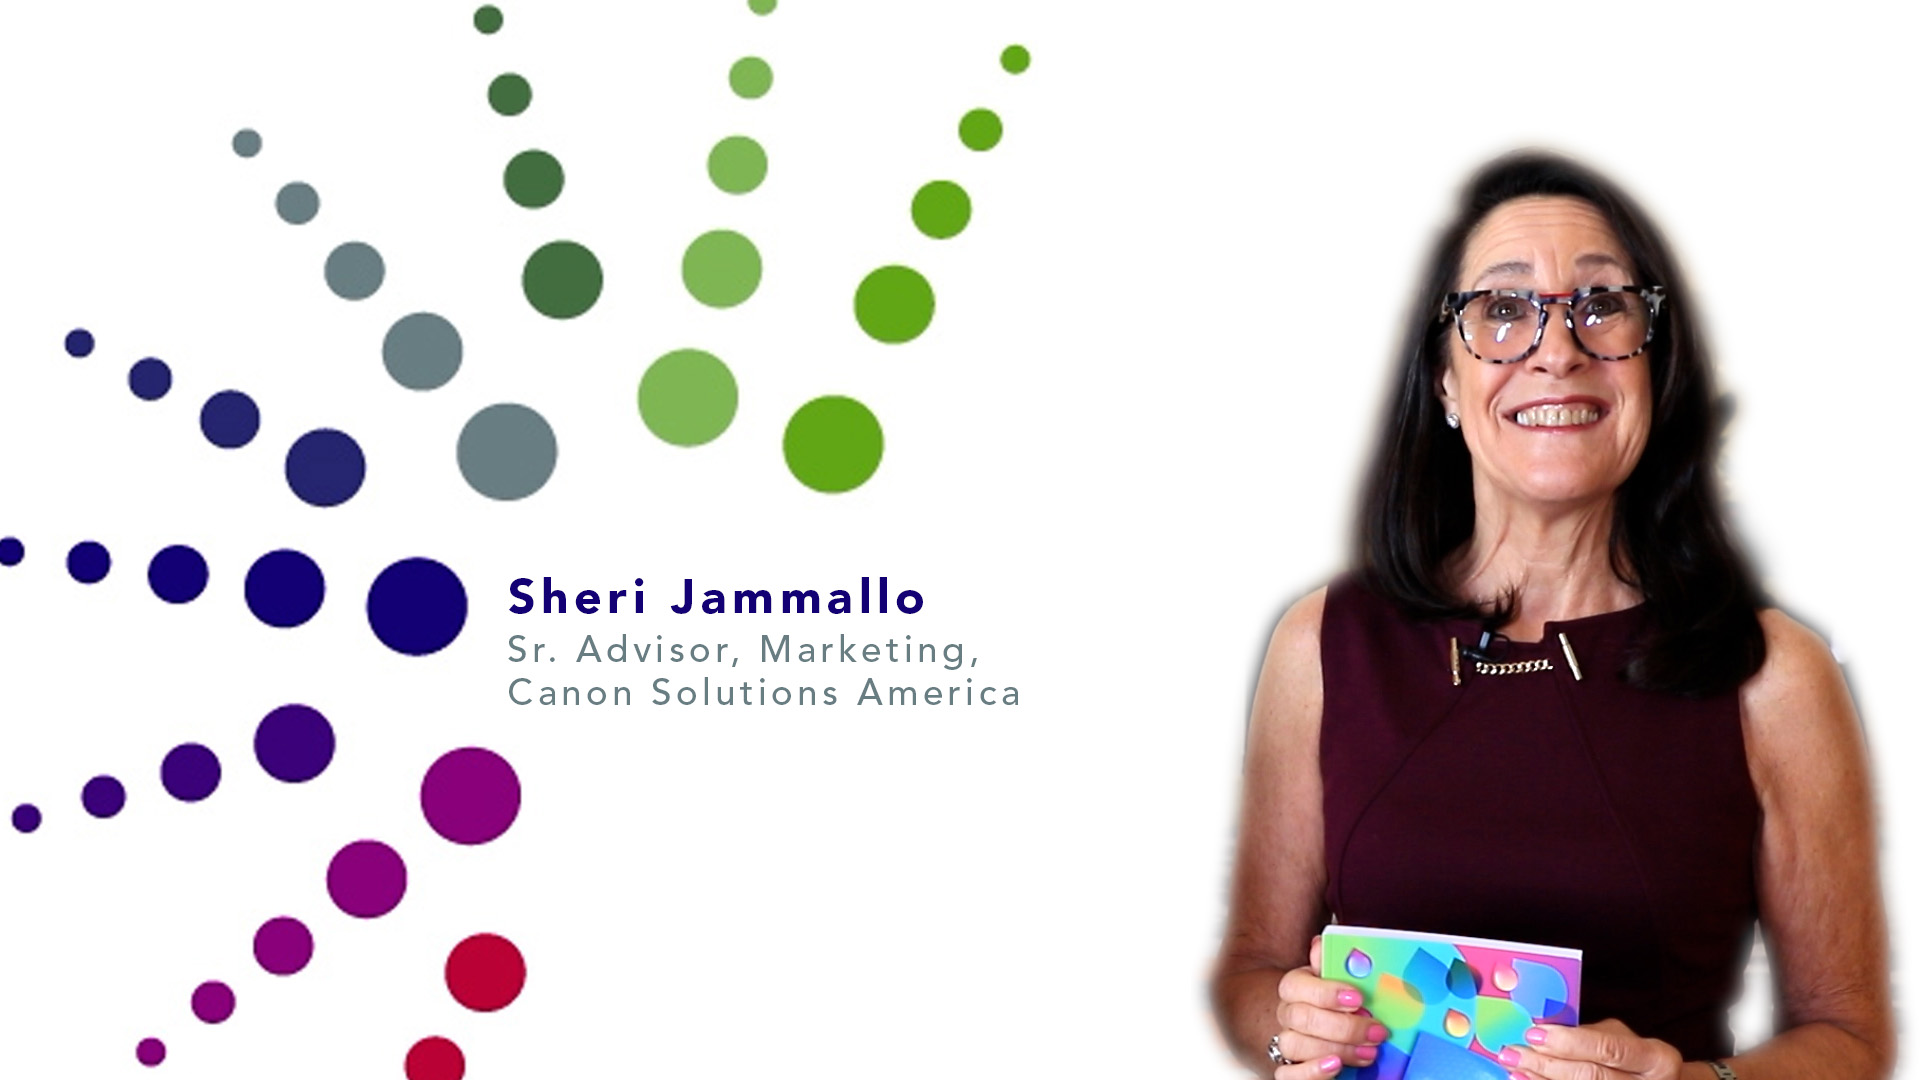 Sheri Jammallo on “The Designer's Guide to a New Generation of Inkjet”